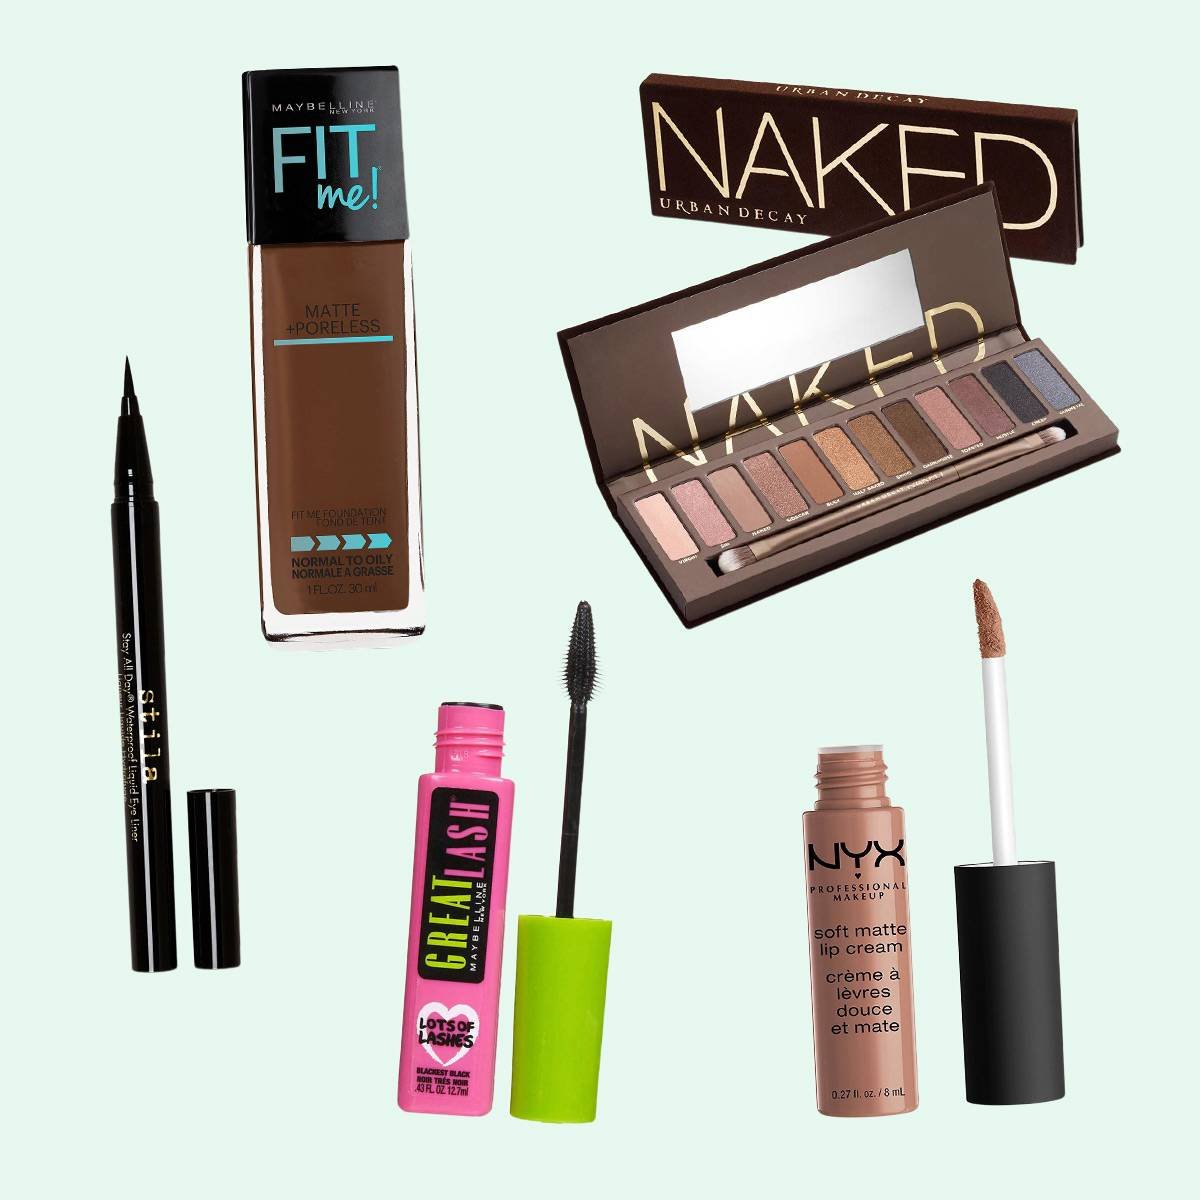 Stila Stay All Day Waterproof Liquid Liner, Maybelline Fit Me Foundation, Urban Decay Naked Palette, Maybelline Great Lash Mascara, NYX Professional Makeup Soft Matte Lip Cream